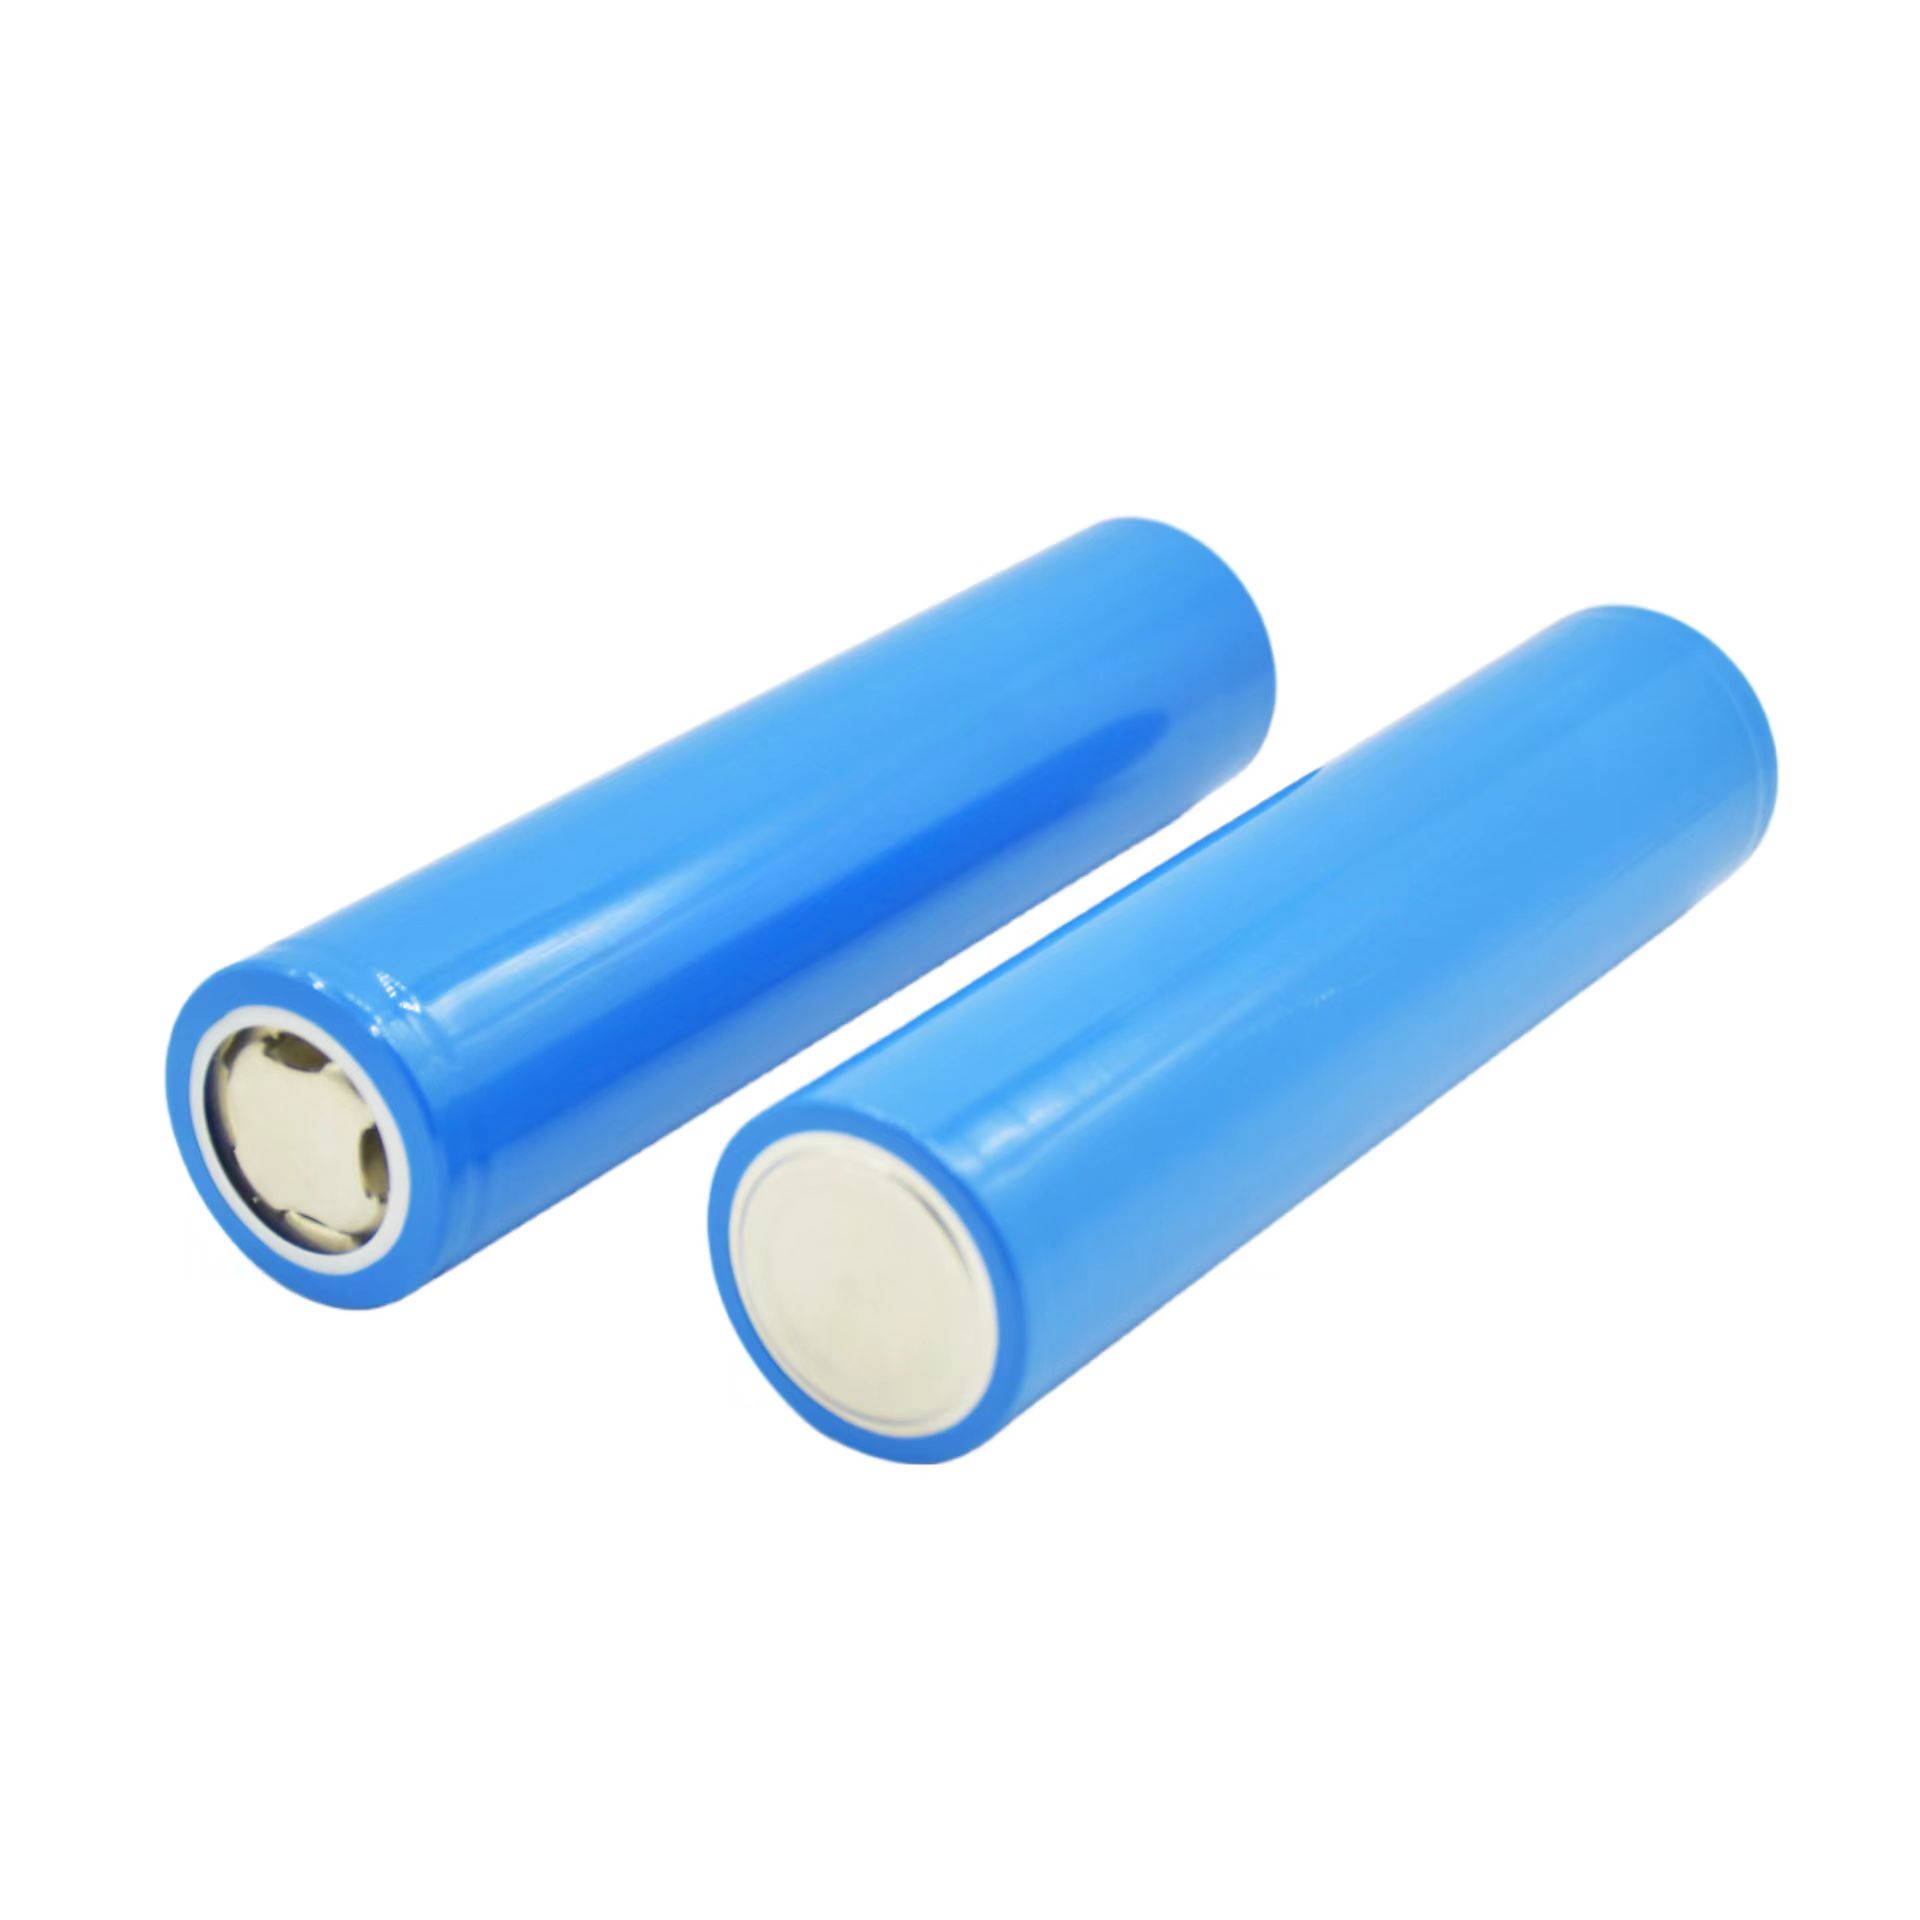 Rechargeable 32140 Cylindrical Sodium-Ion Battery